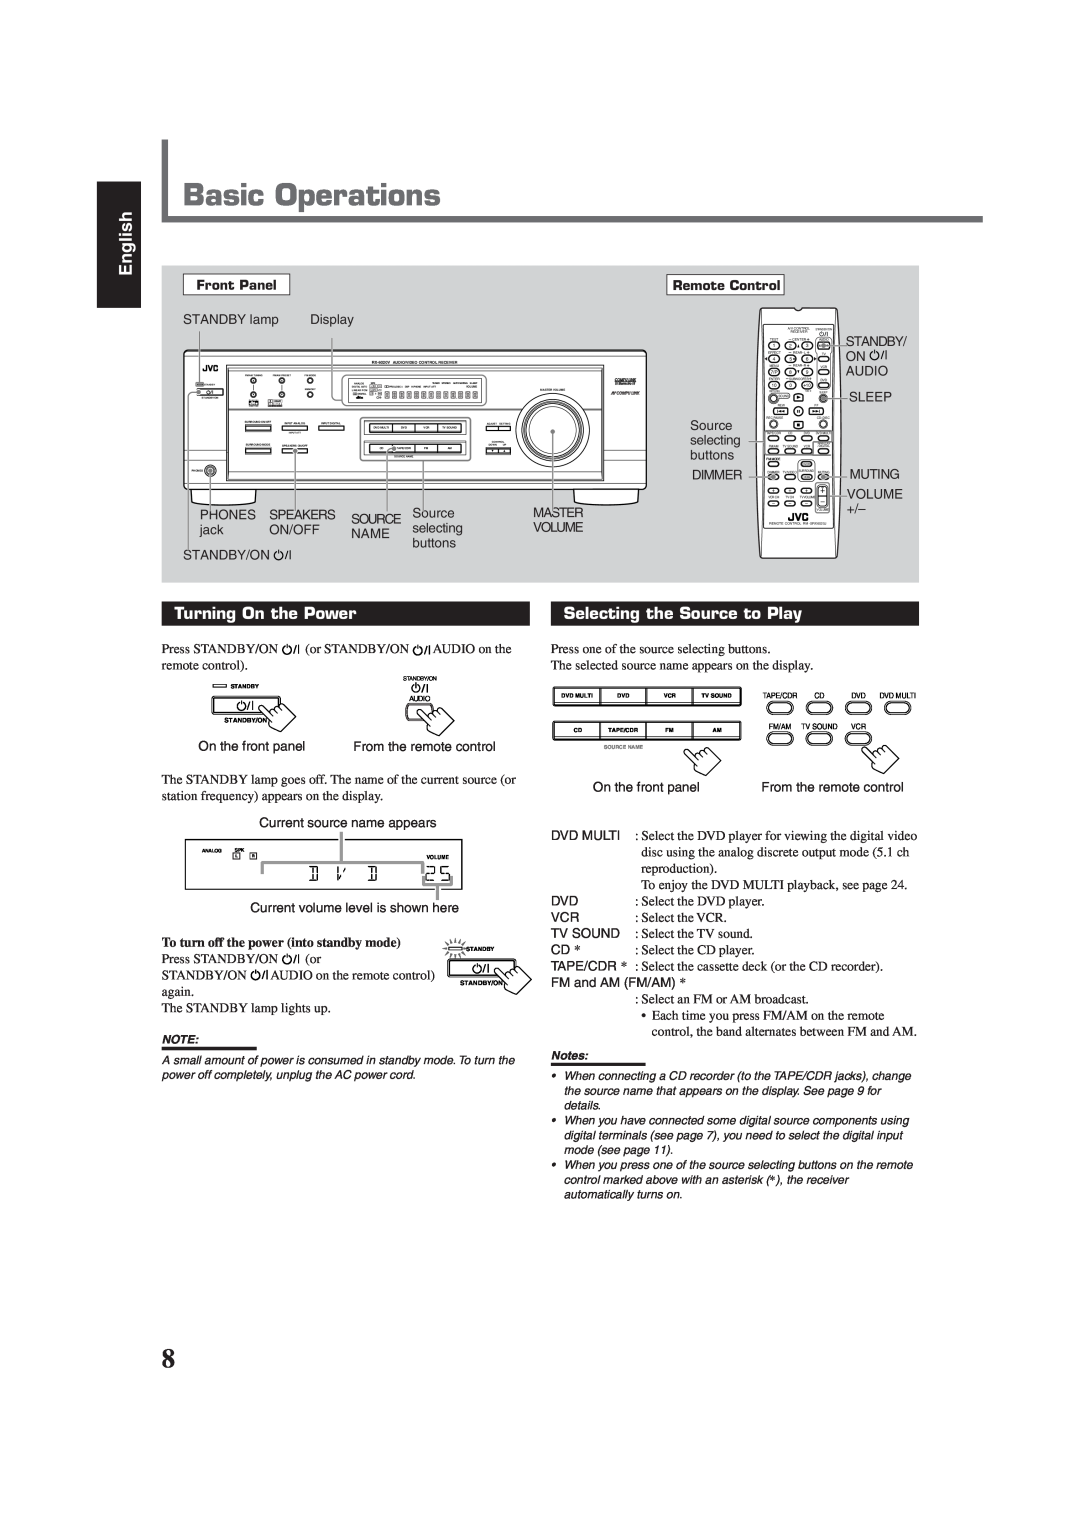 JVC RX-6020VBK manual Basic Operations, Turning On the Power, Selecting the Source to Play, English 